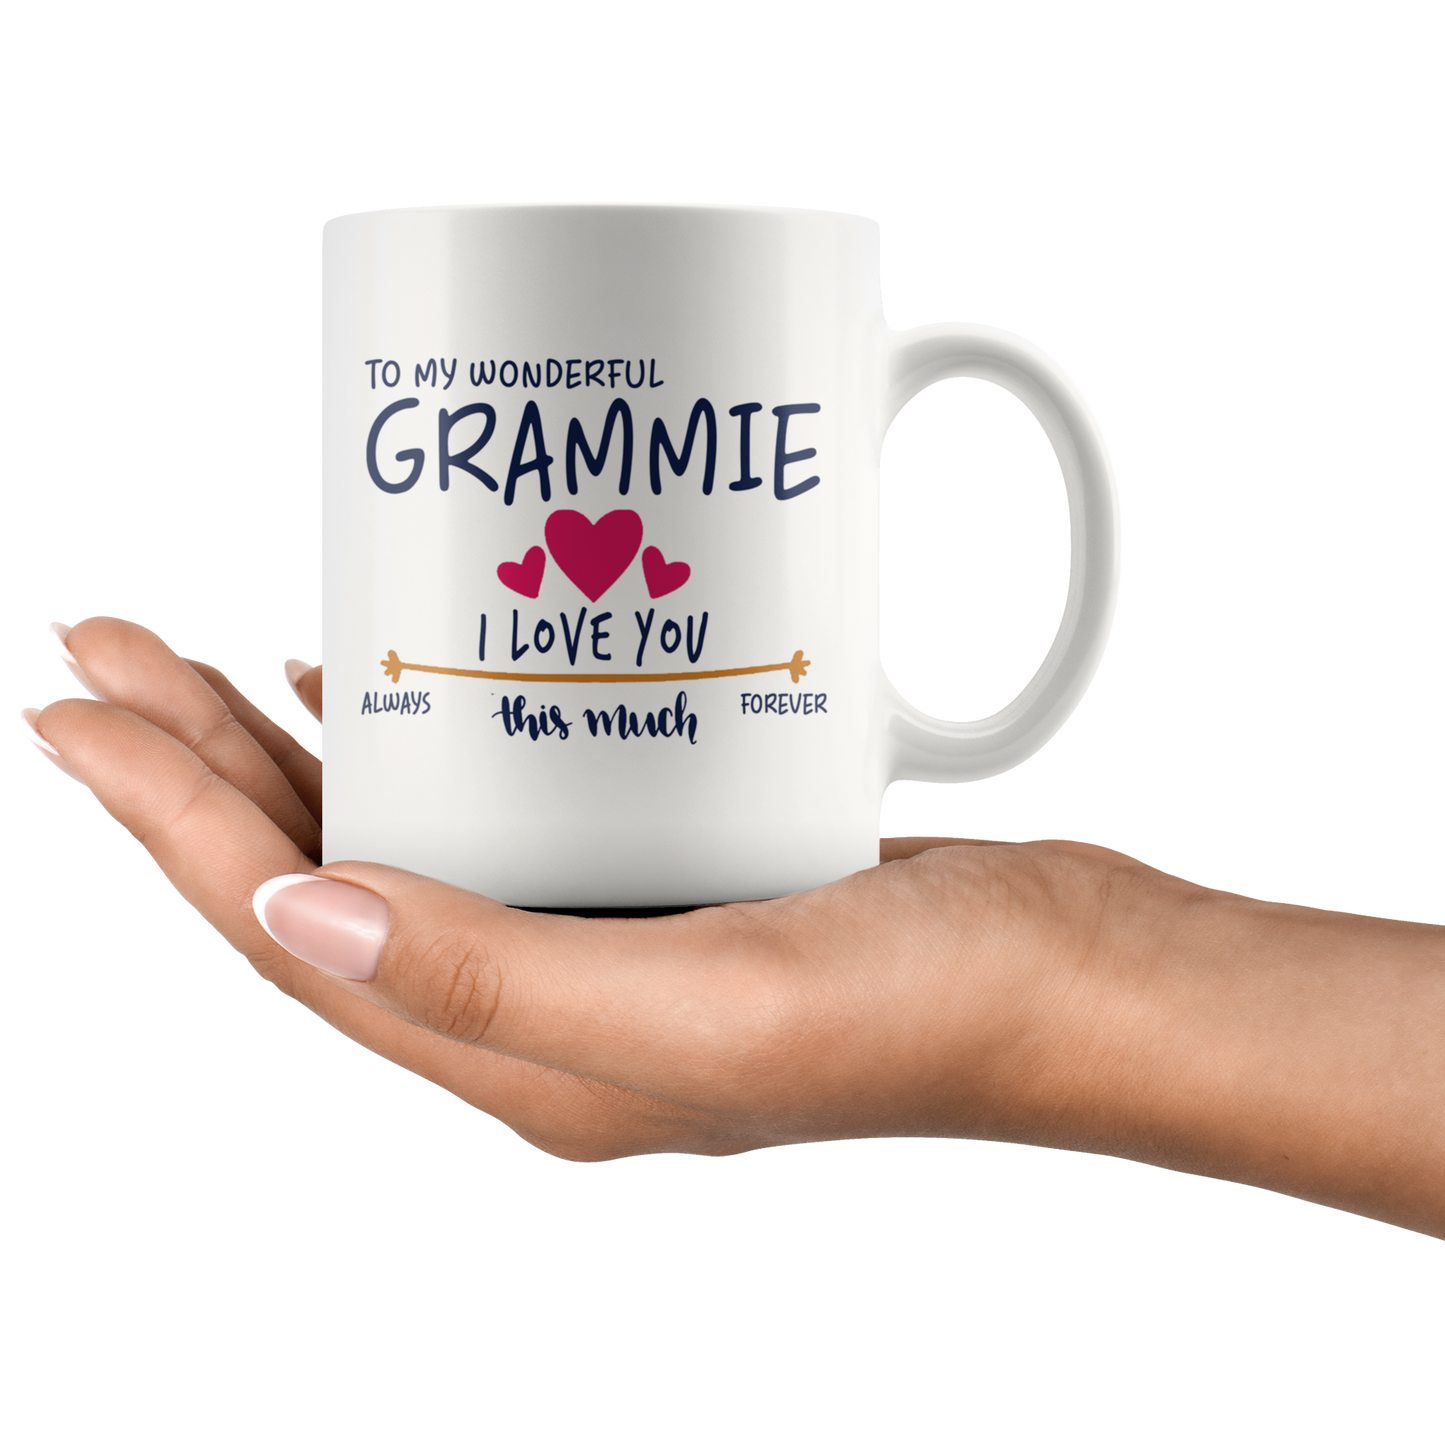 M-20470302-sp-22778 - Valentines Day Mug Gifts for Dad, Mom, Granddad, Granny - to